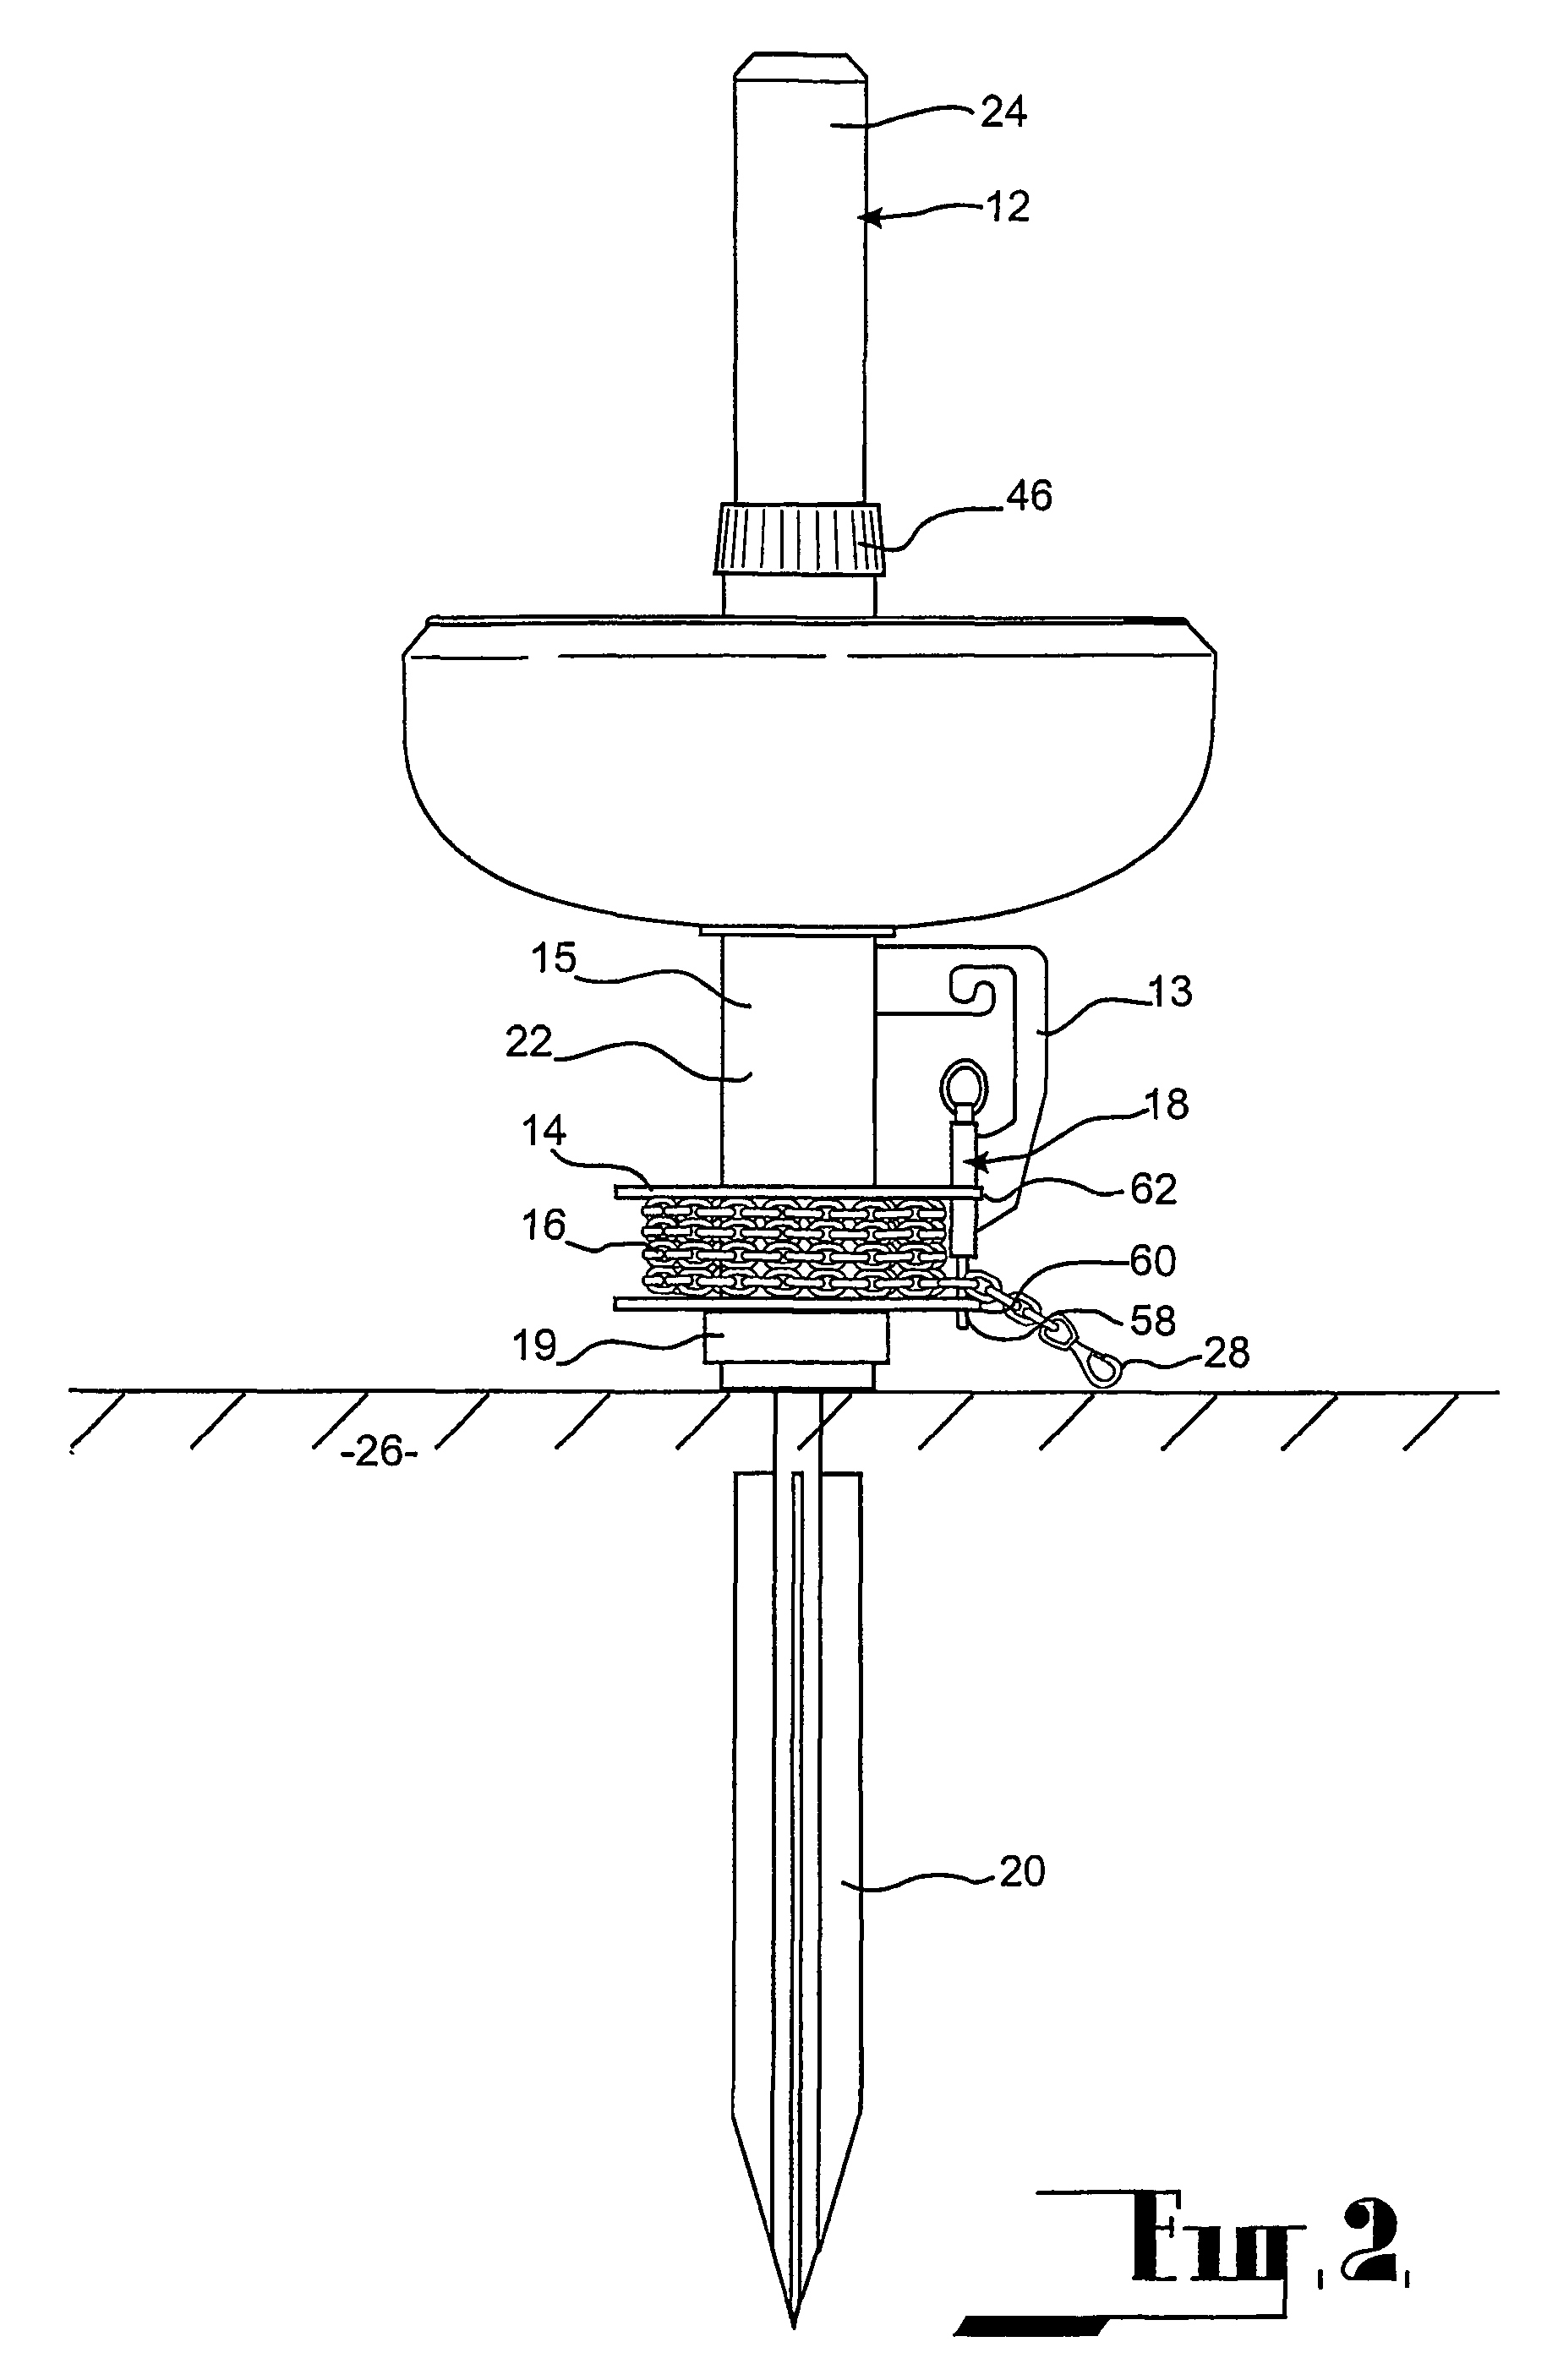 Tethering device